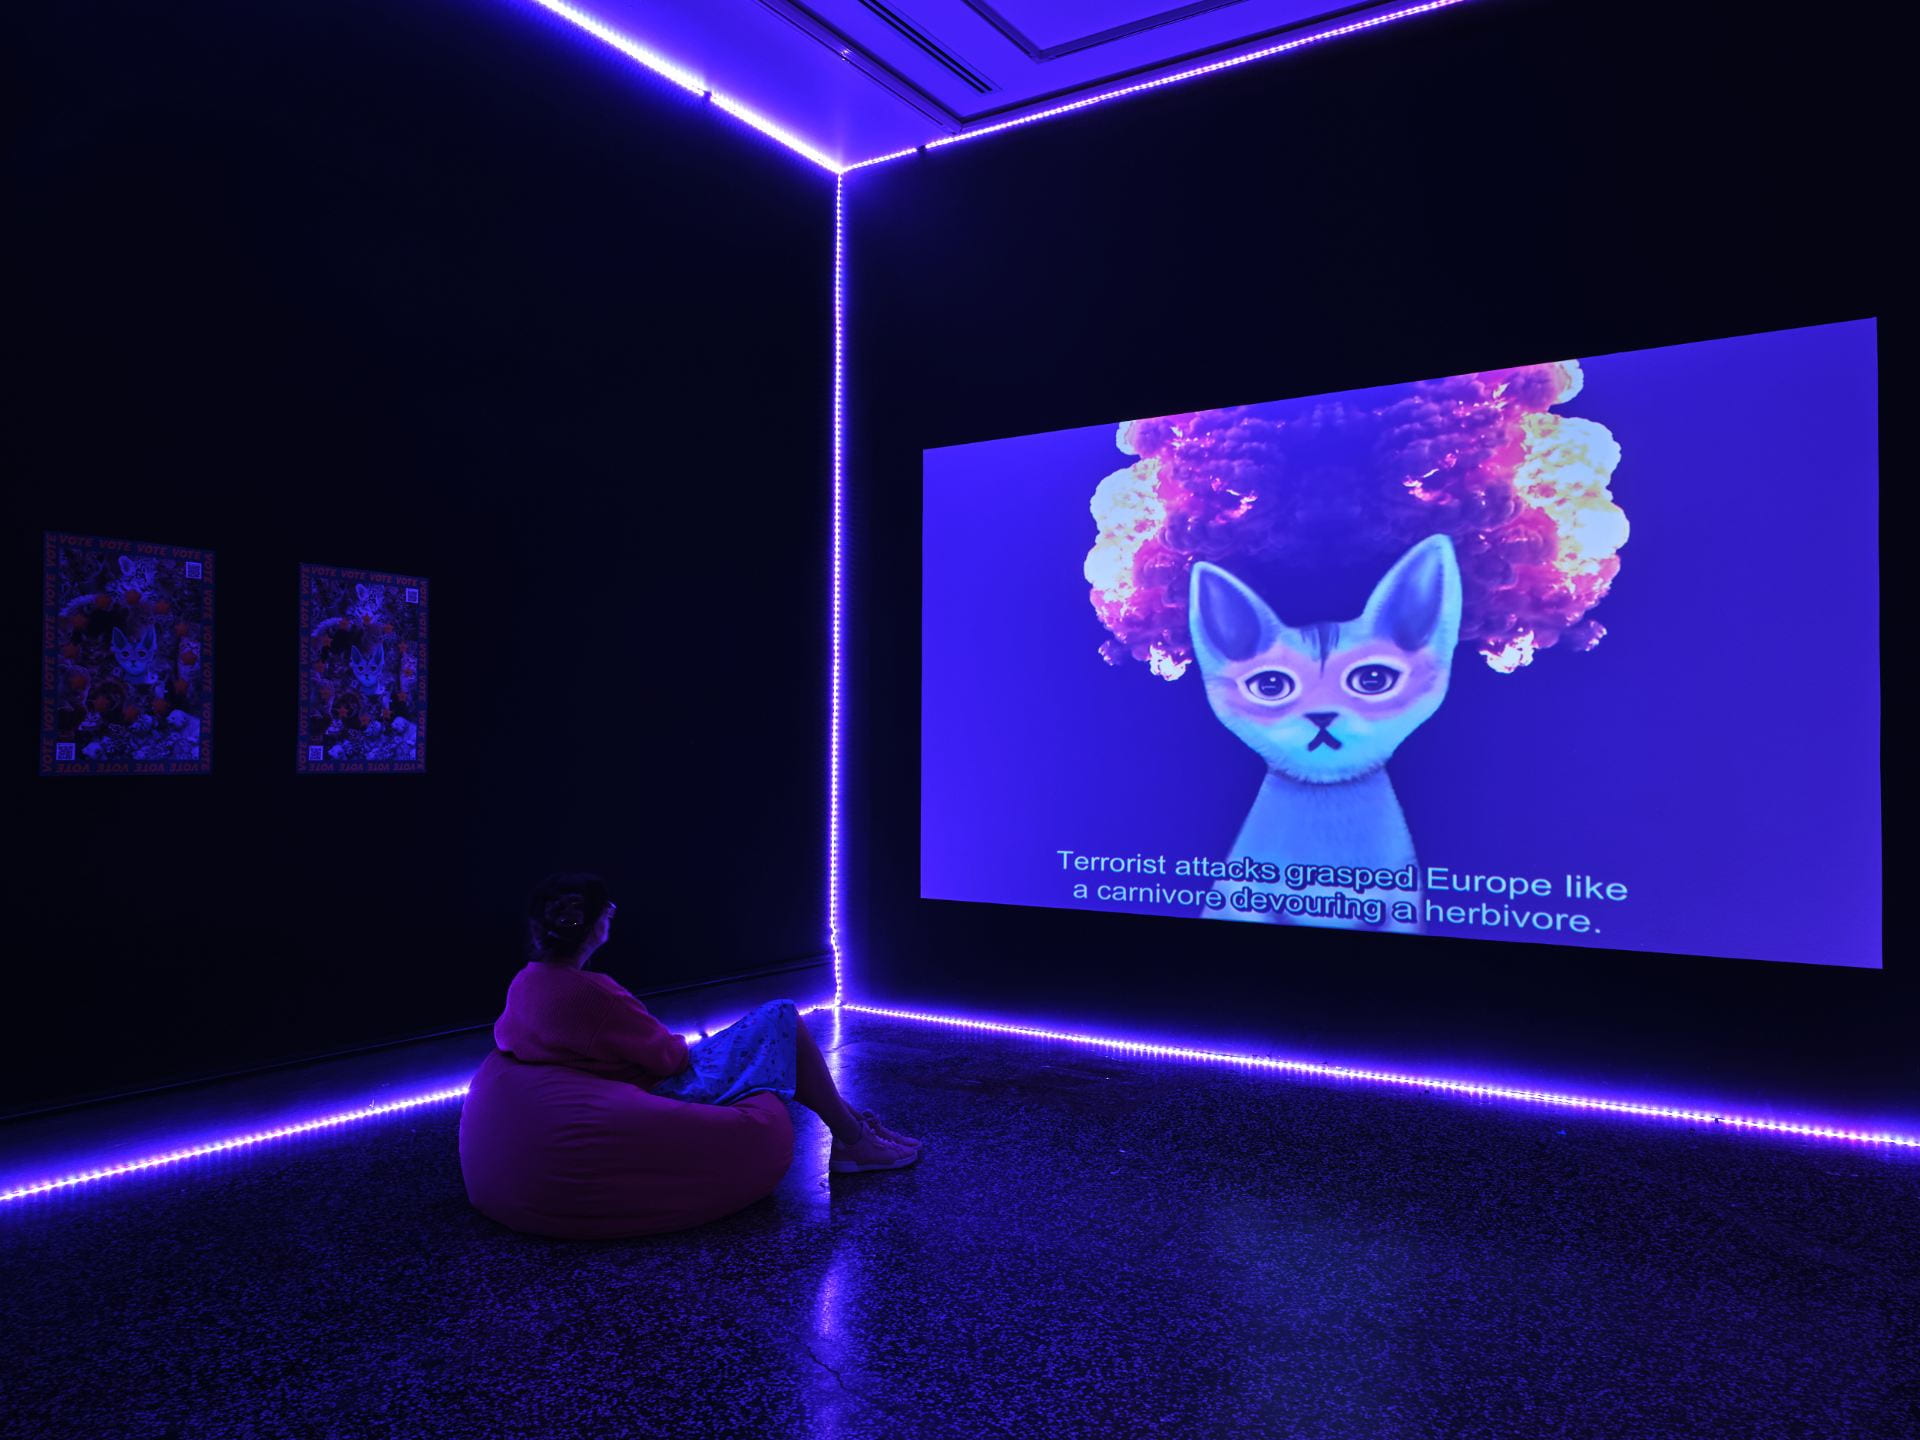 A film projected in a dark room lined with purple neon lights. A woman sitting on a bean bag watches an animated blue and pink cat talk at the viewer, surrounded by an explosion in the background. The subtitle along the bottom of the screen reads "terrorist attacks grasped Europe like a carnivore devouring a herbivore".